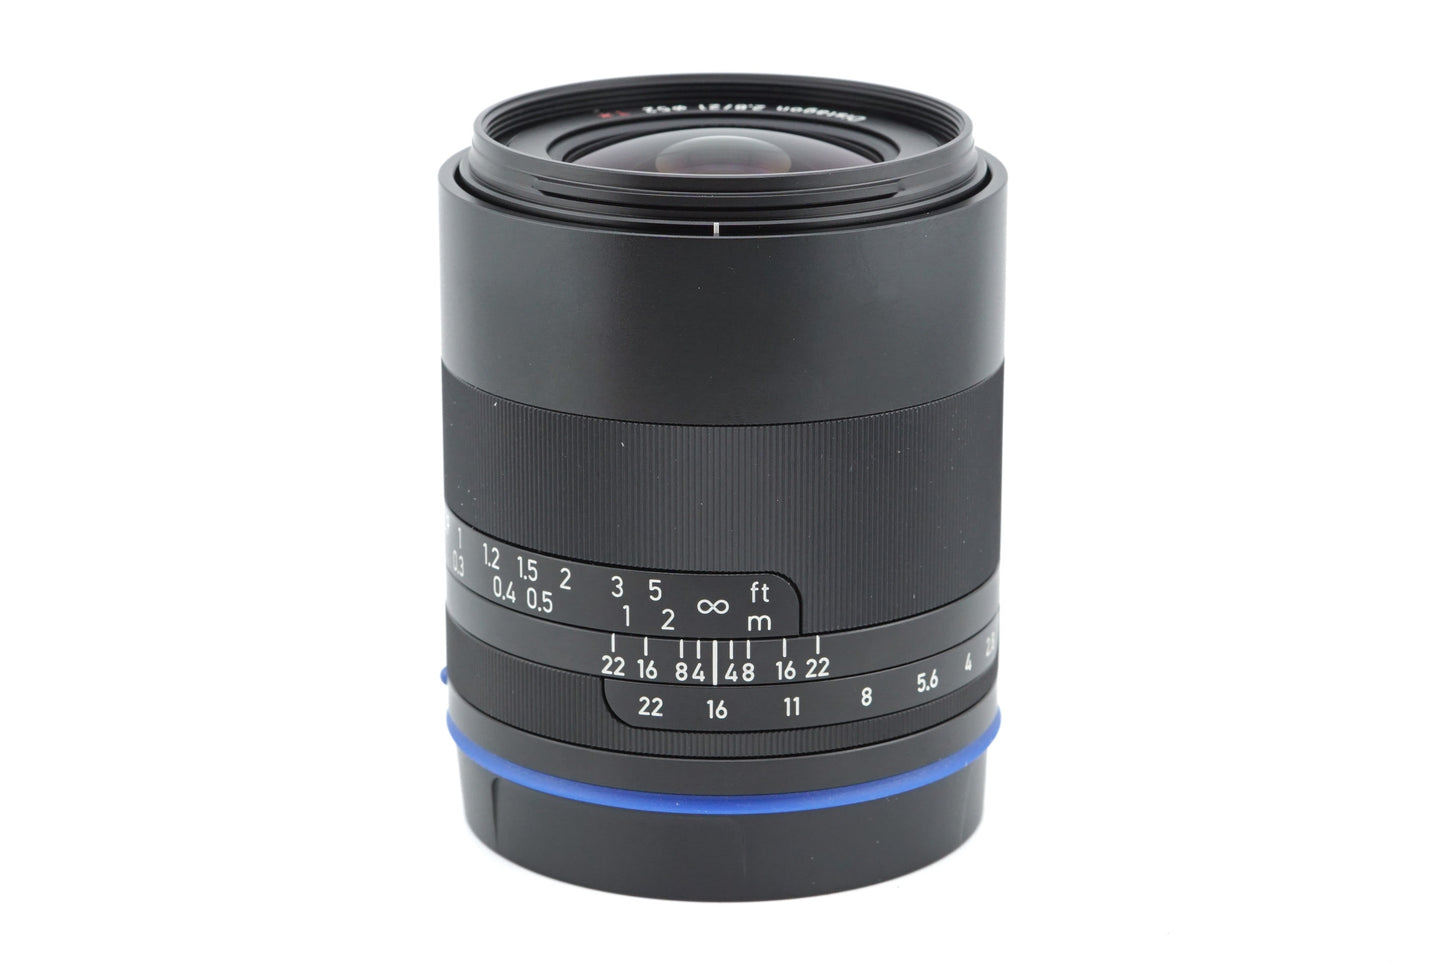 Zeiss 21mm f2.8 Distagon Loxia T* - Lens